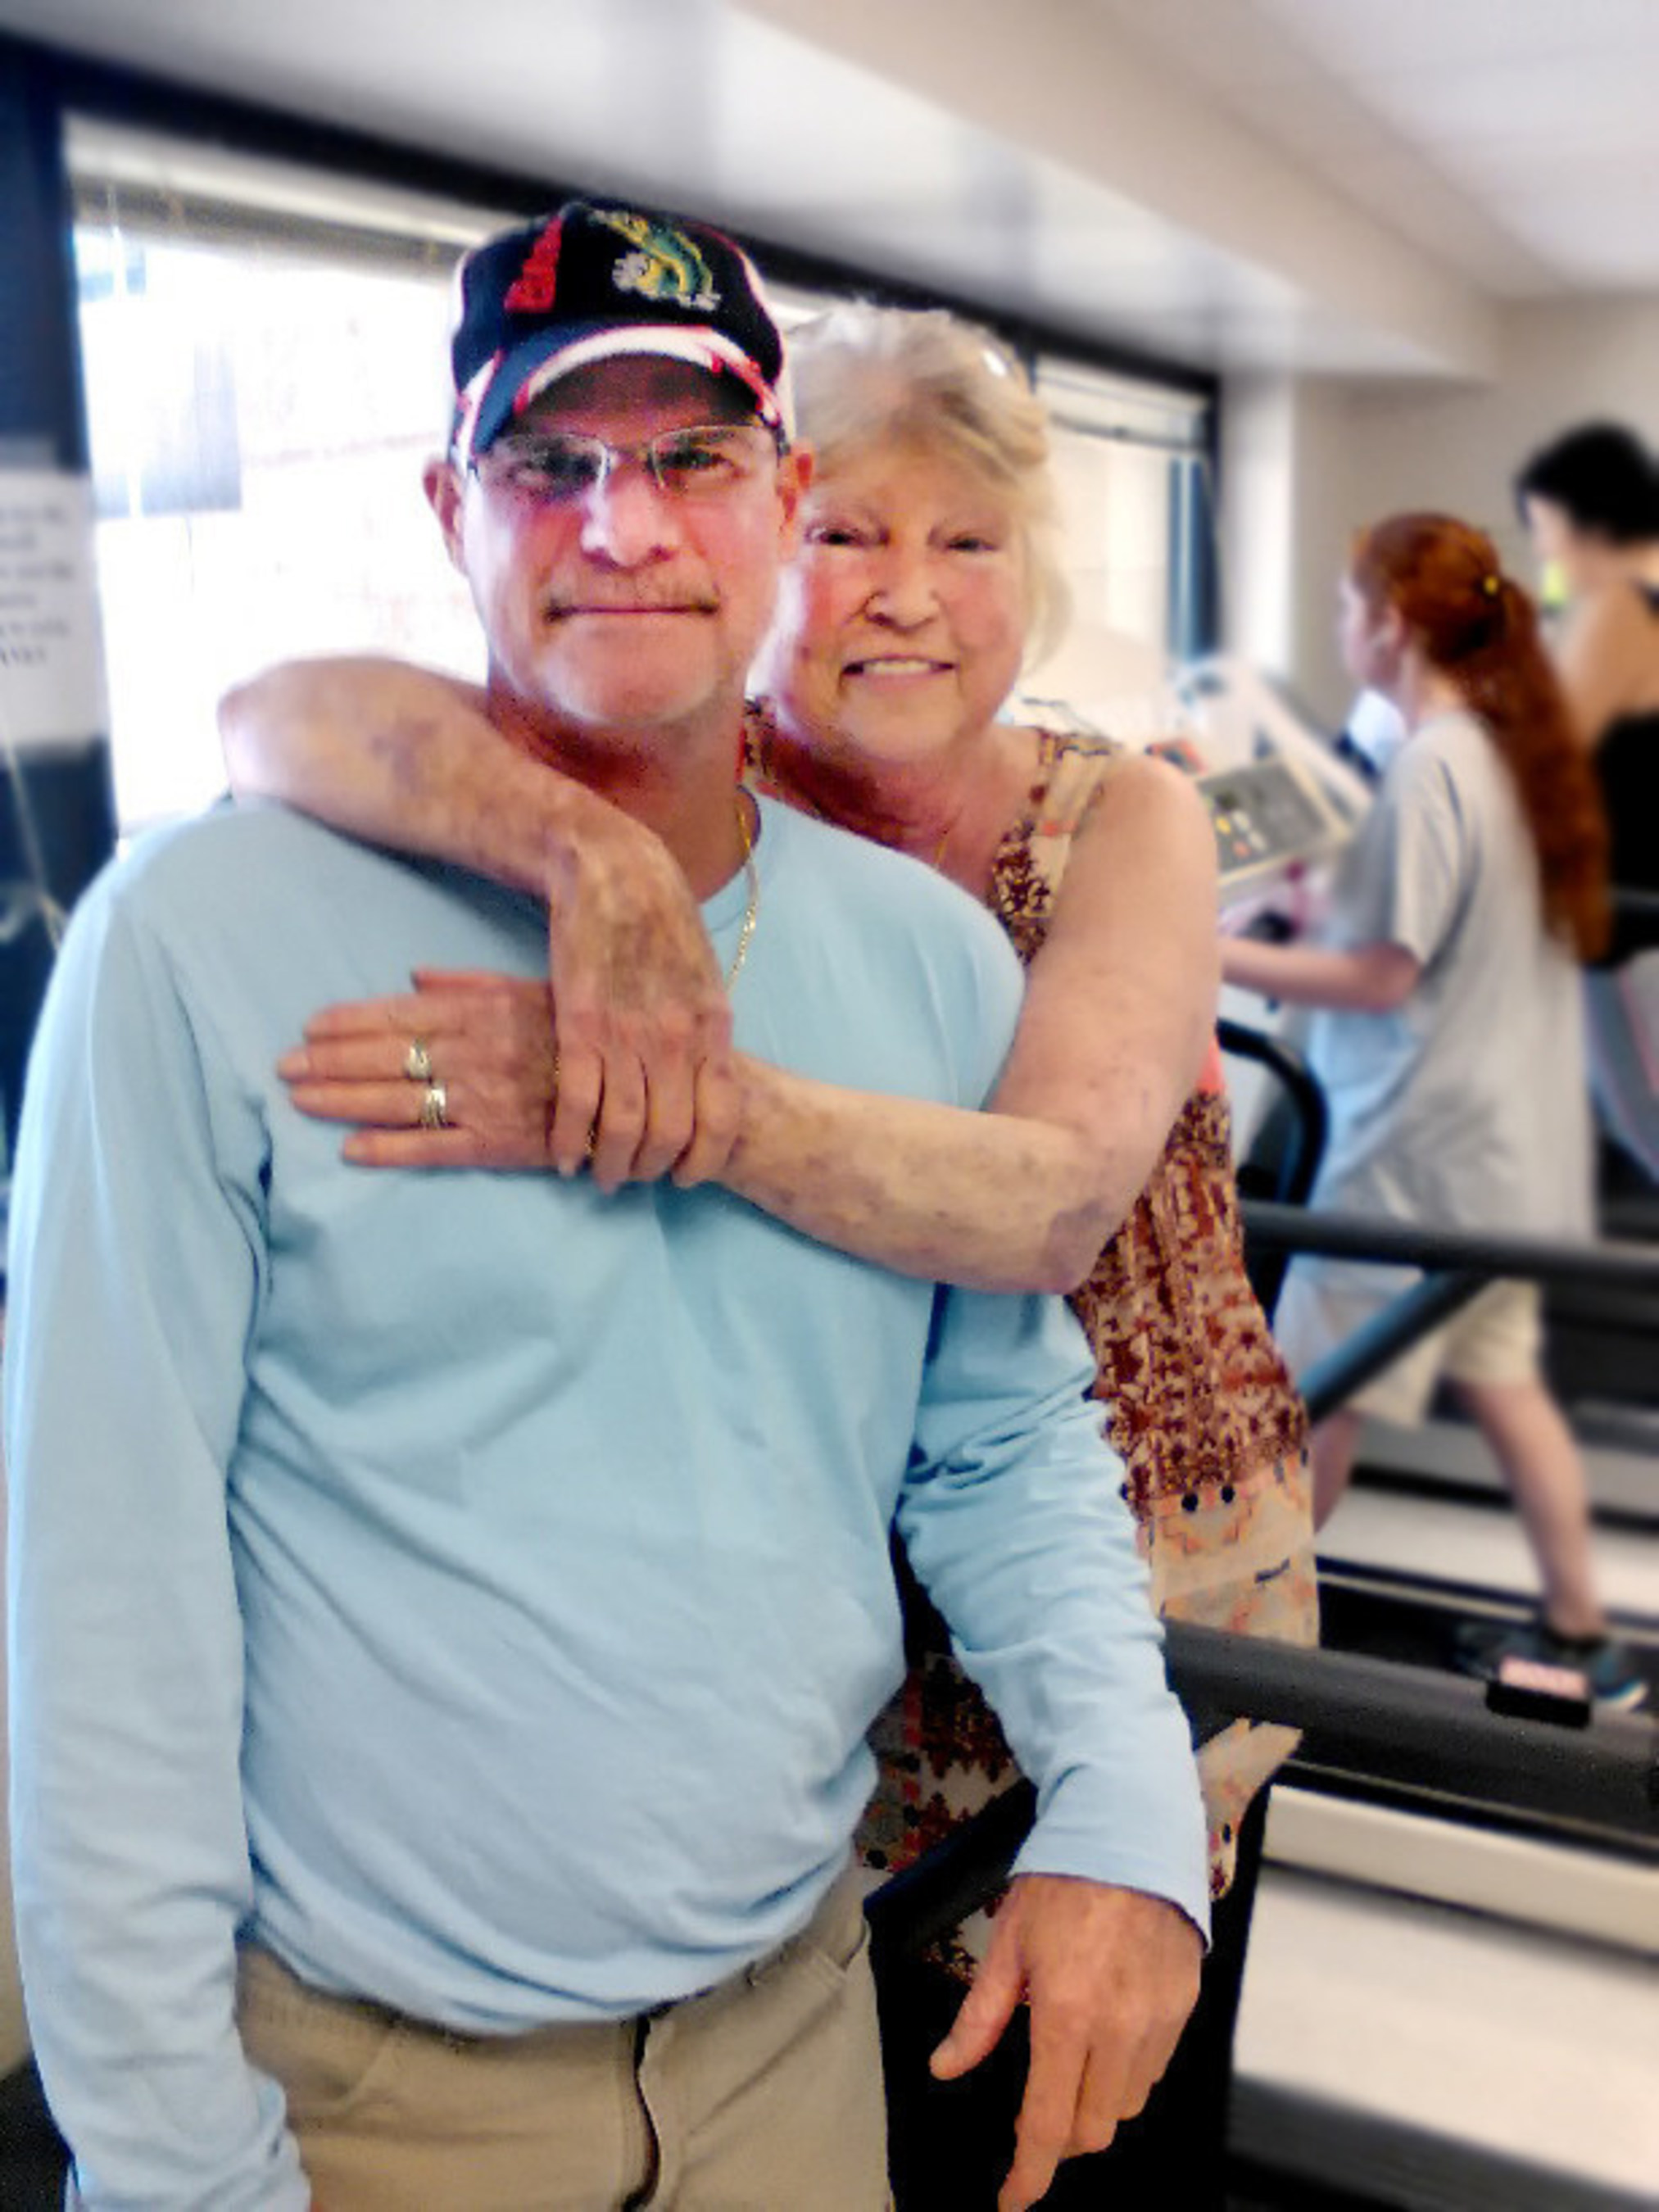 Patricia McDaris, 64, takes a break from the treadmill to pose with her son, John McDaris. Before her lung transplant, McDaris couldn't walk because of her decreased lung function. Now she can work out, take long walks and get back to fully enjoying life. McDaris has health coverage through Staywell Heath Plan, a WellCare health plan dedicated to serving Medicaid members in Florida. "I'm still amazed at how brilliant the doctors are and my insurance, the hospital, the hotel, my son, all the people I have come into contact with," she said.